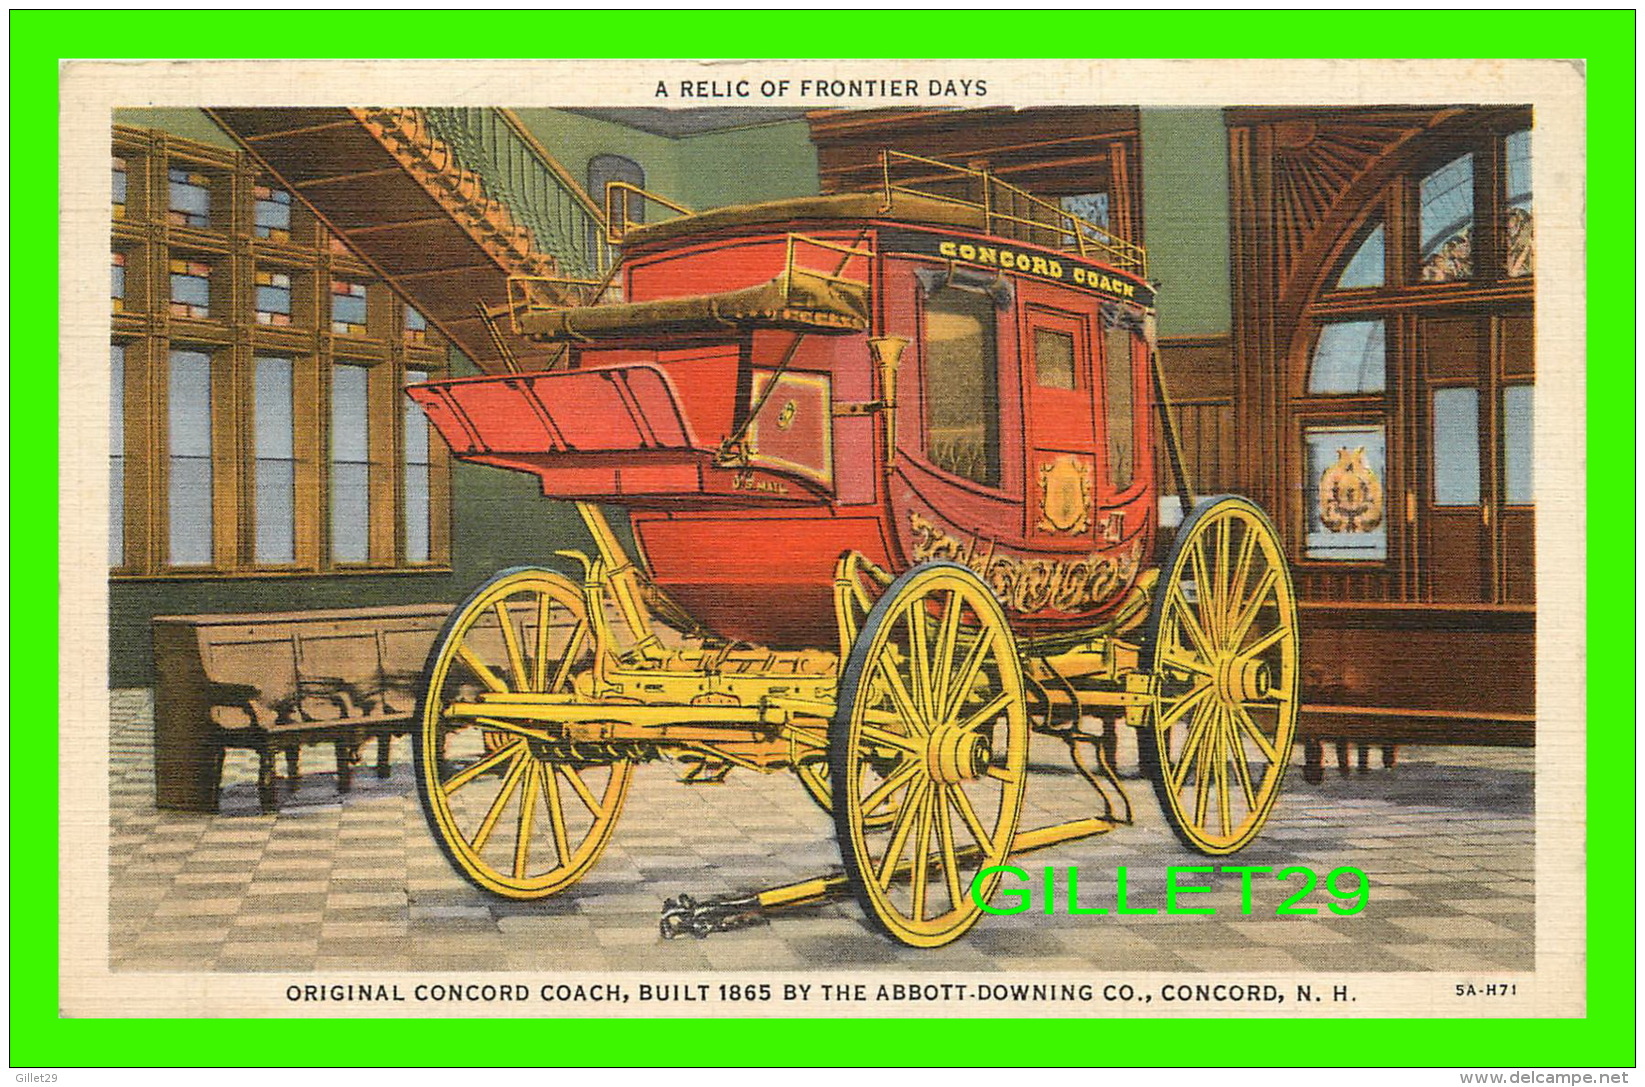 CONCORD, NH - ORIGINAL CONCORD COACH, BUILT 1865 BY THE ABBOTT-DOWNING CO - TRAVEL IN 1941 - AMERICAN ART POST CARD CO - Concord